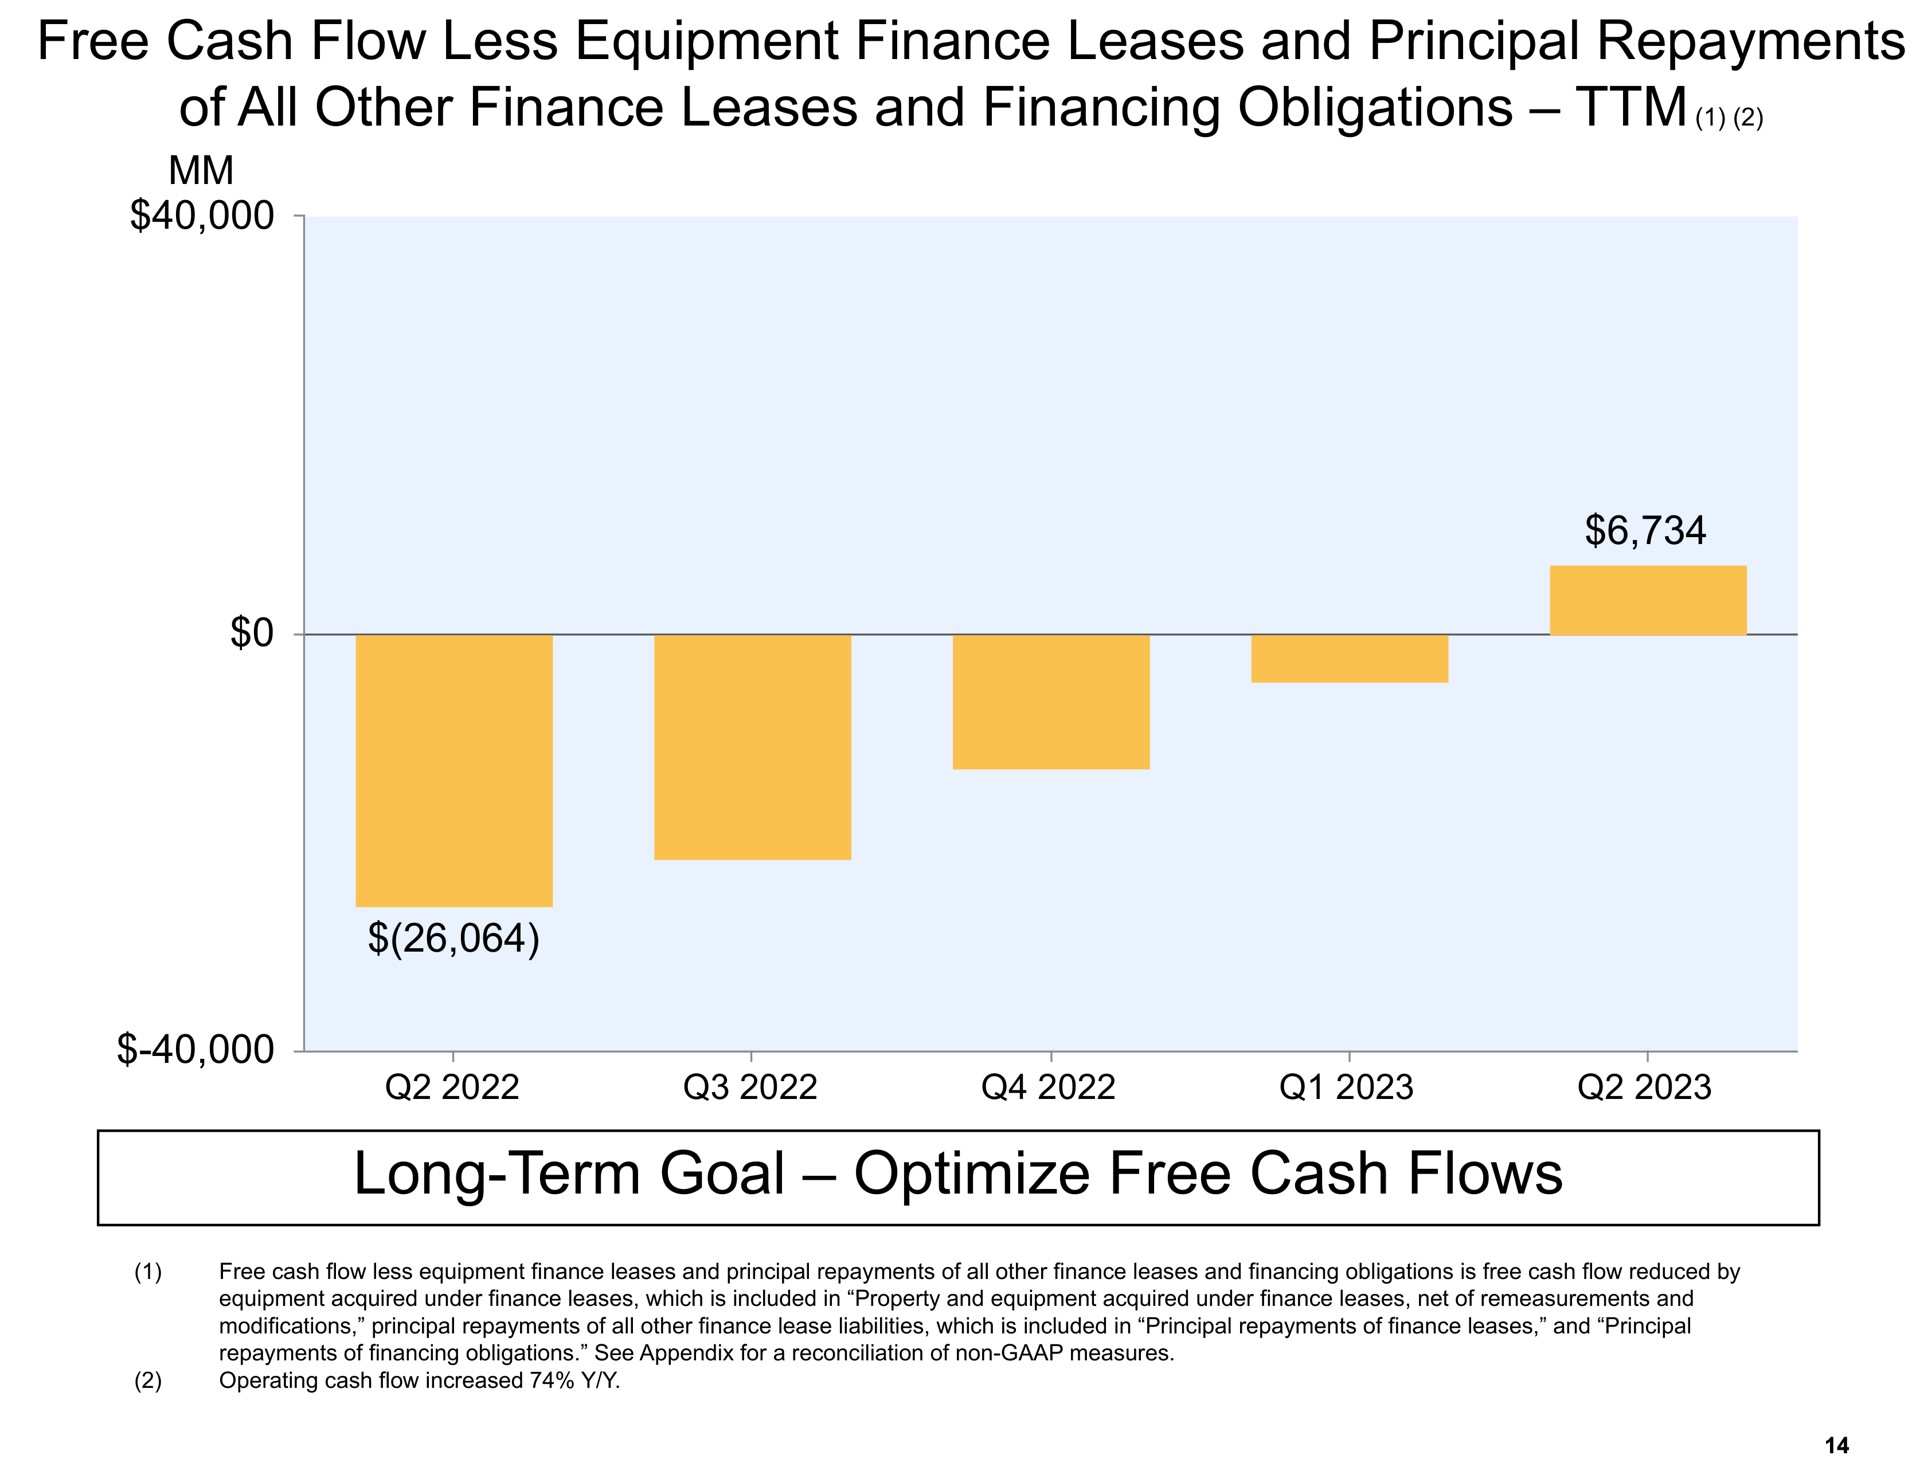 long term goal optimize free cash flows of all other finance leases and financing obligations | Amazon